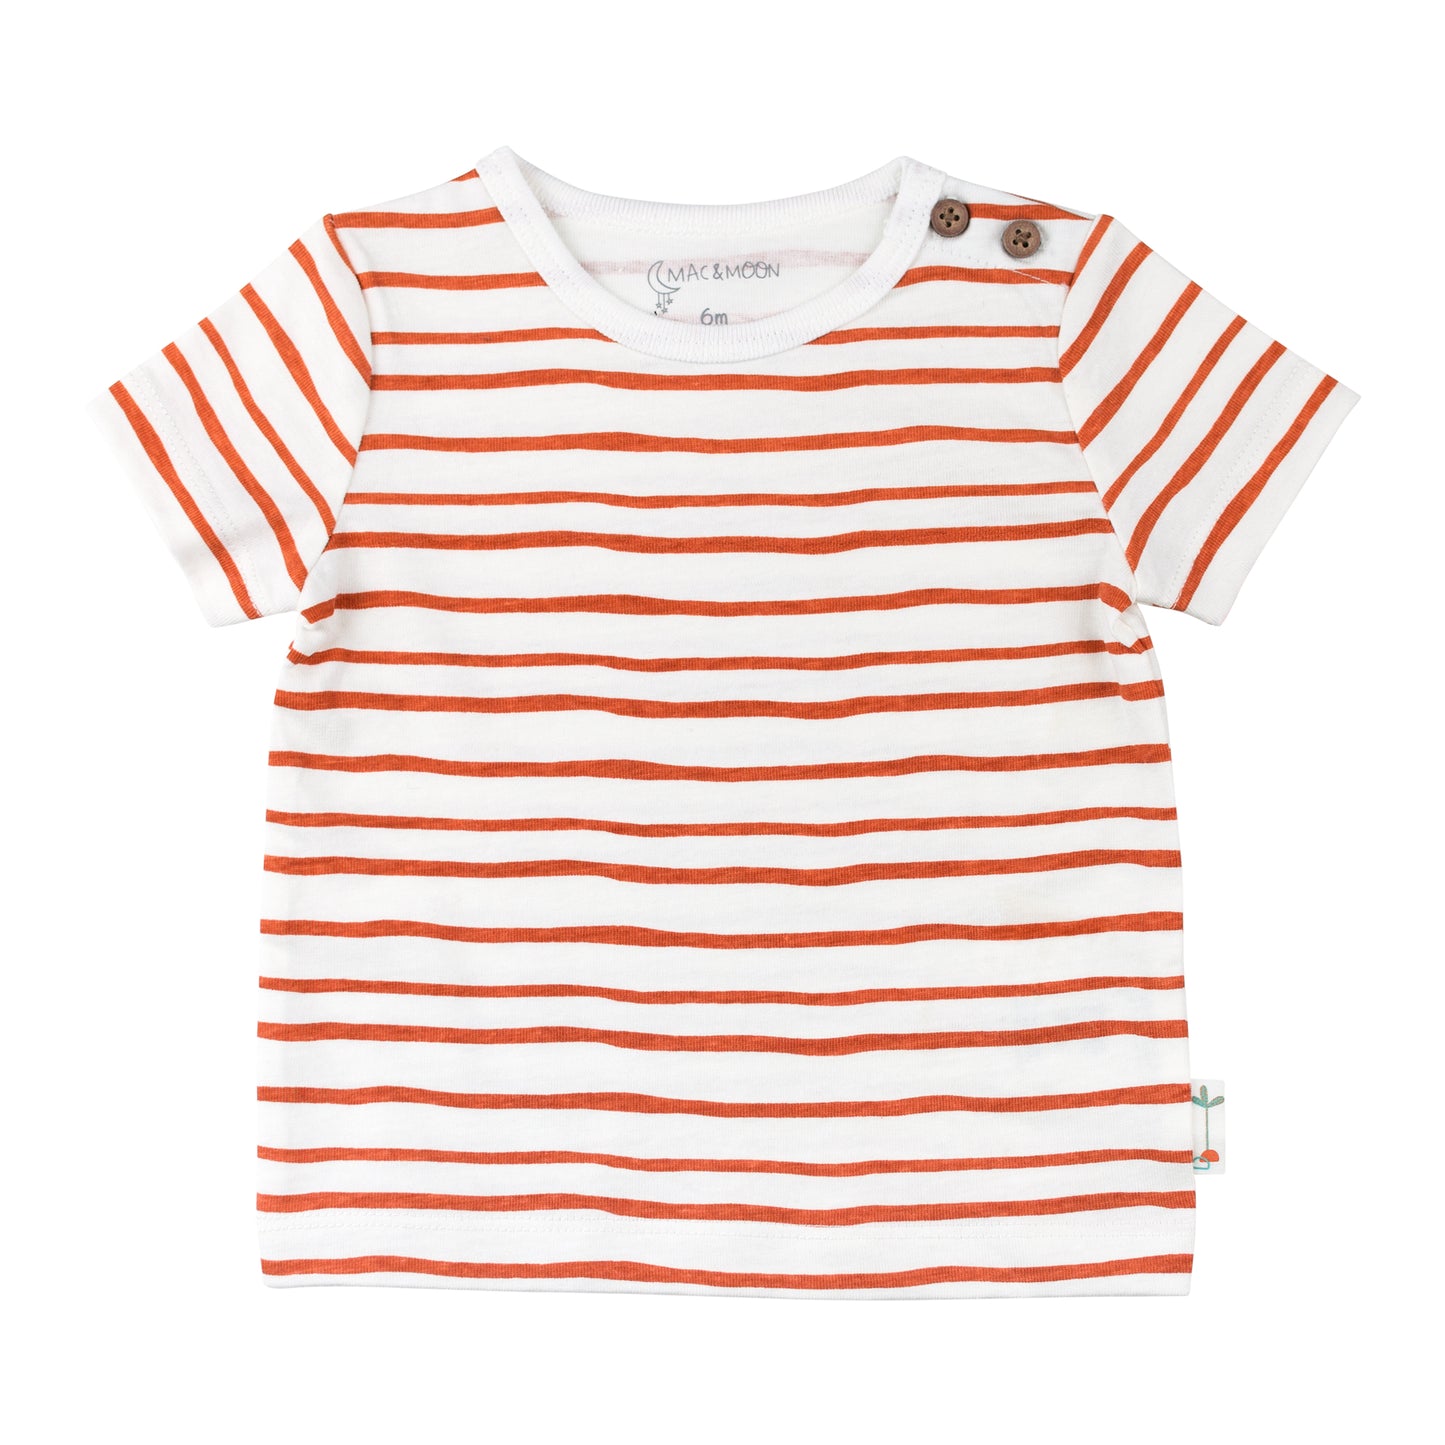 2-Pack Tees in Stripes and Dune Print